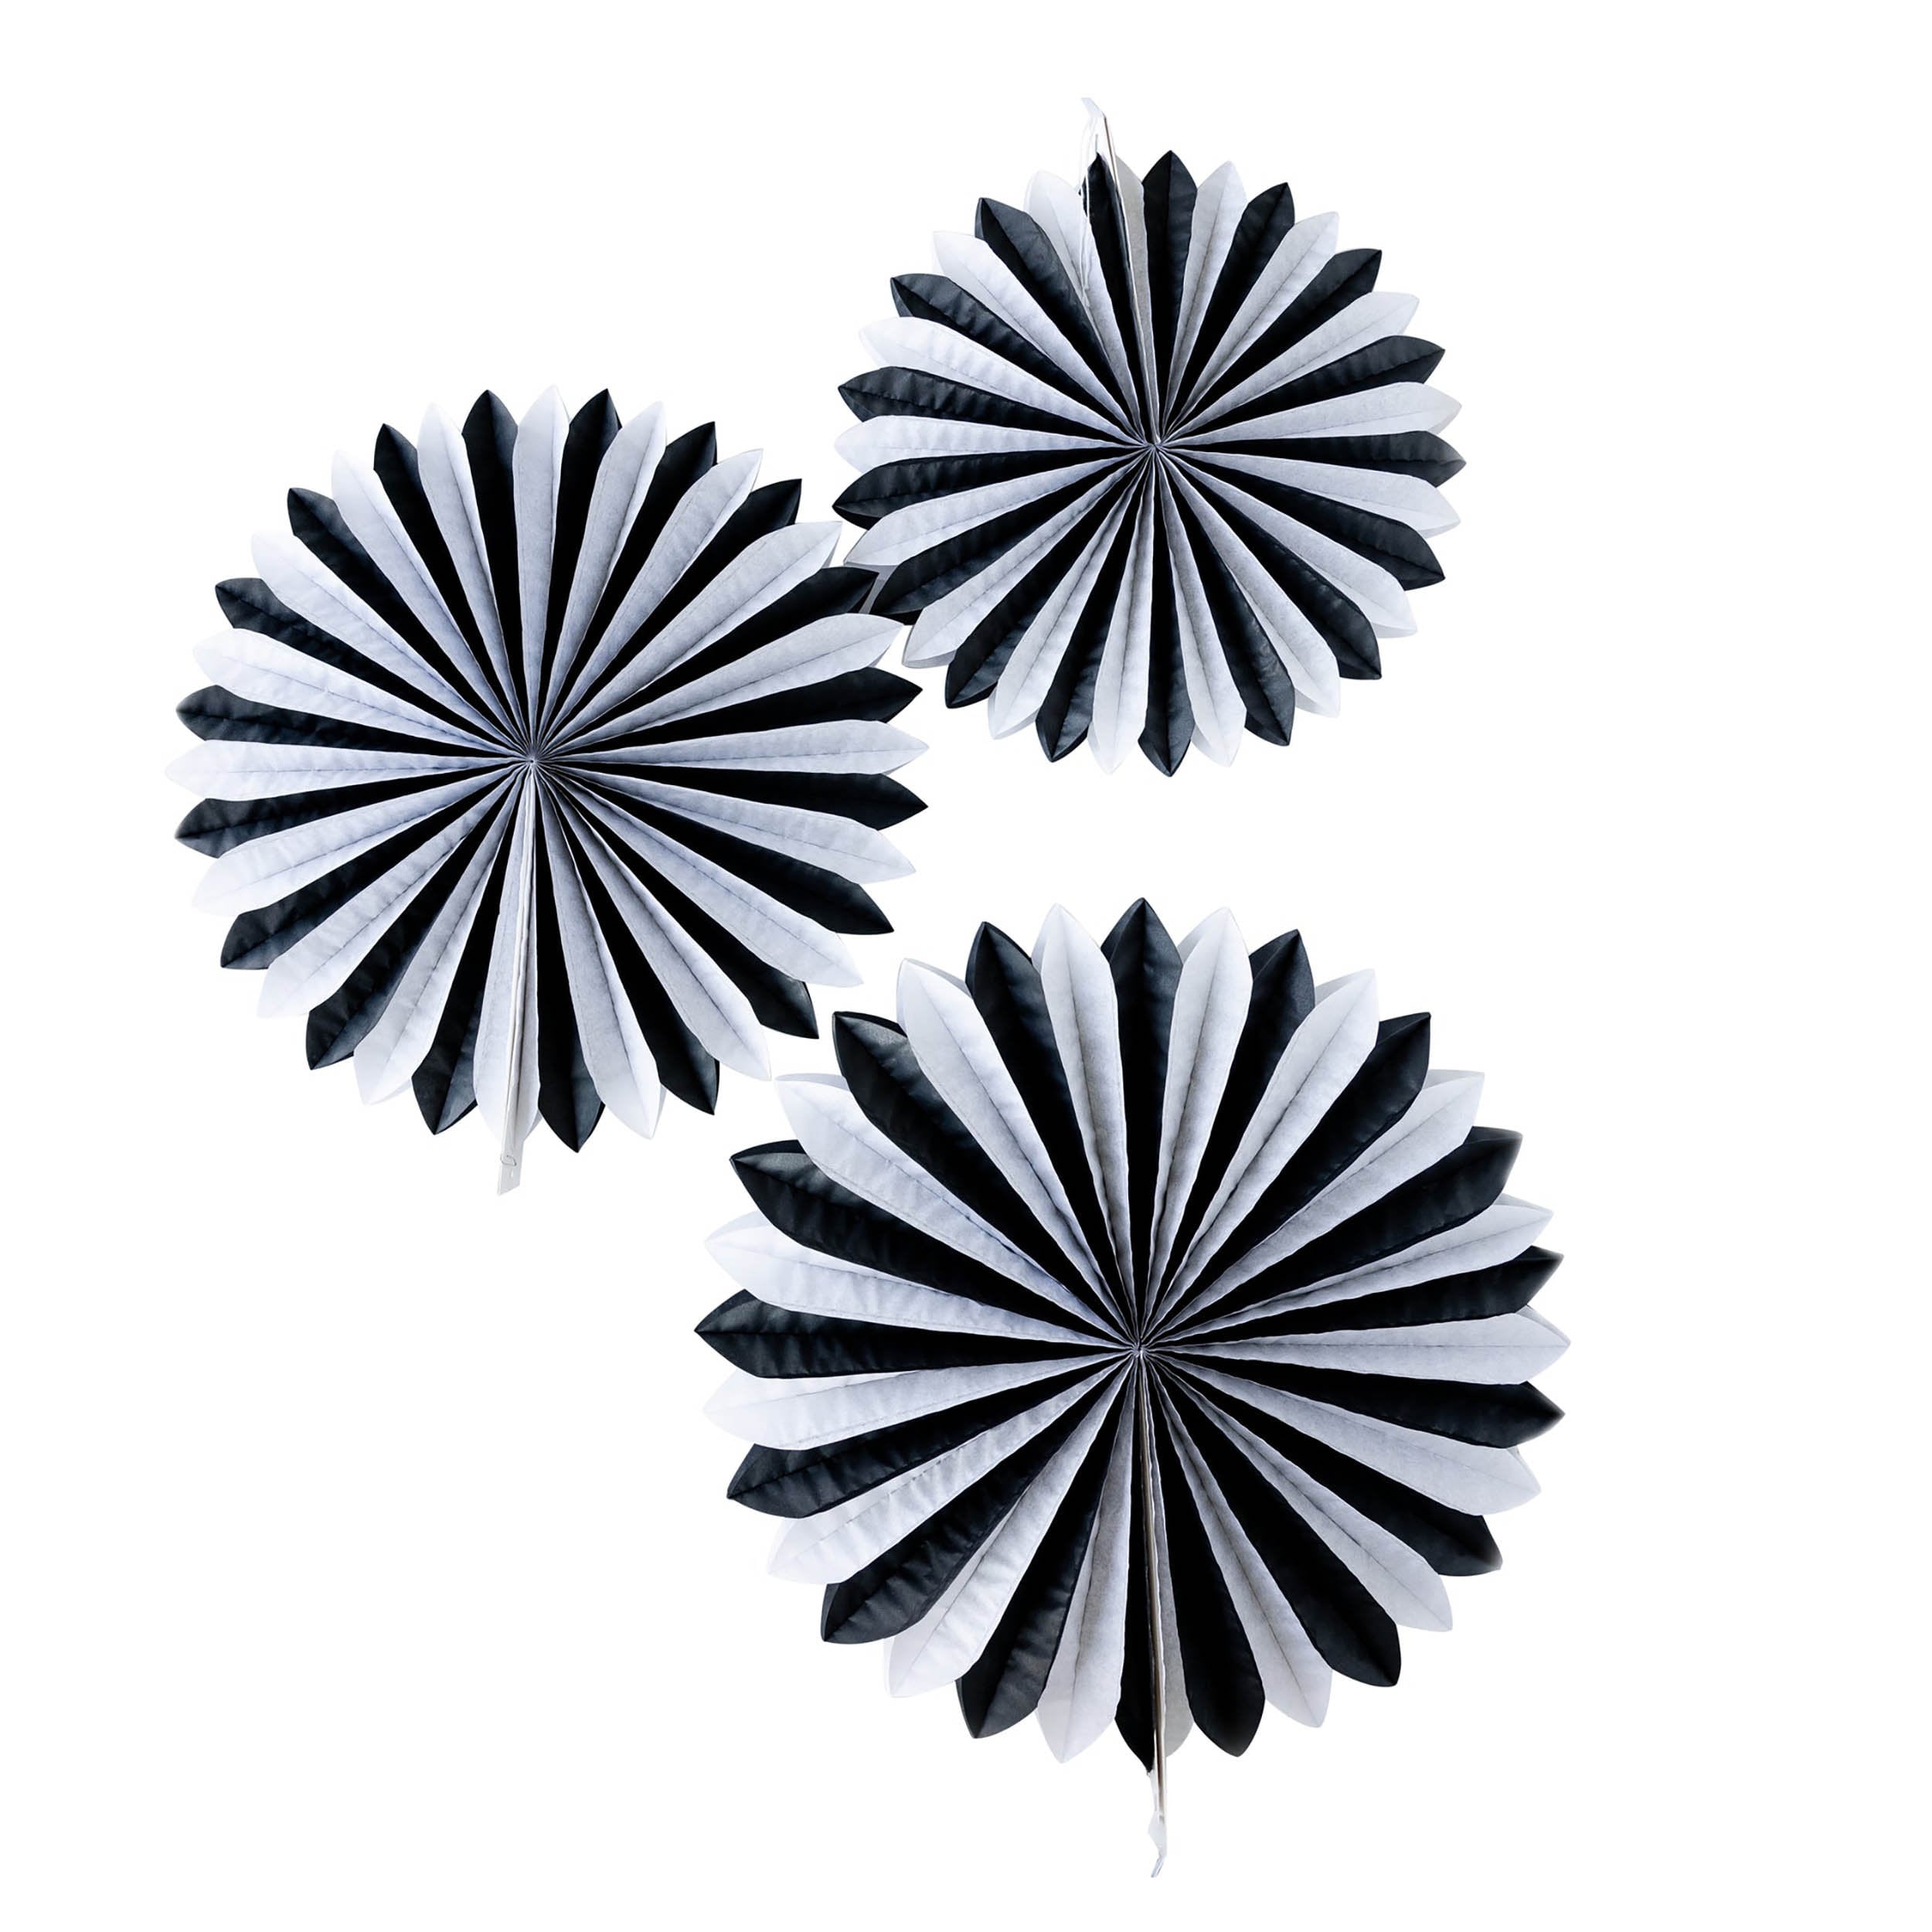 Black and White Party Decorations | Halloween Party Decorations - Retro Halloween Decor - Black Party Decorations - Decorative Paper Fans